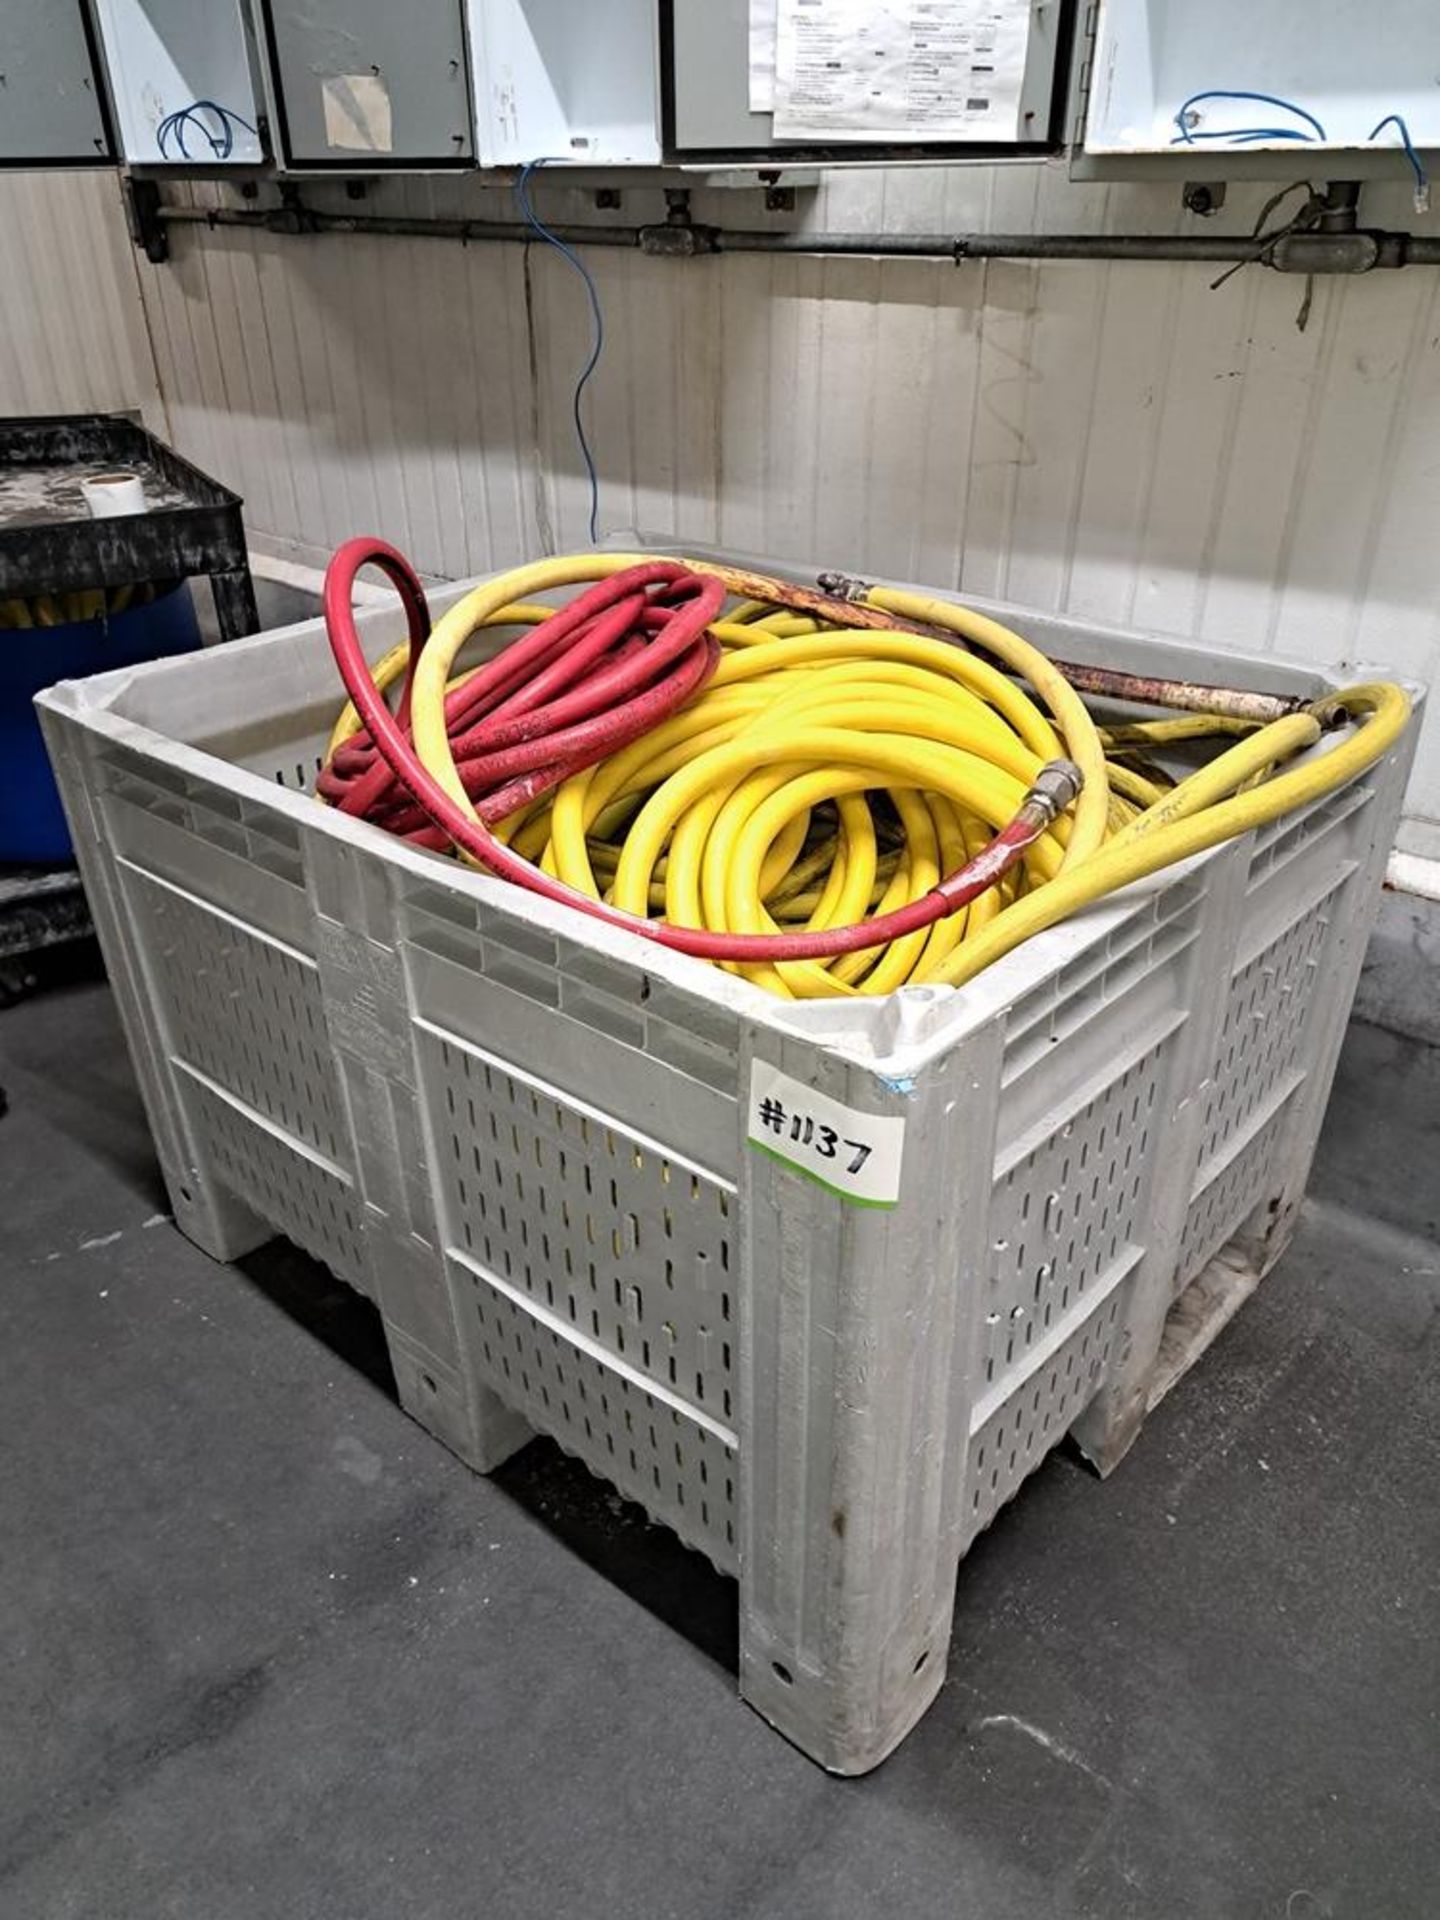 Lot Water Hose in Plastic Tote: Required Loading Fee $50.00, Rigger-Norm Pavlish, Nebraska Stainless